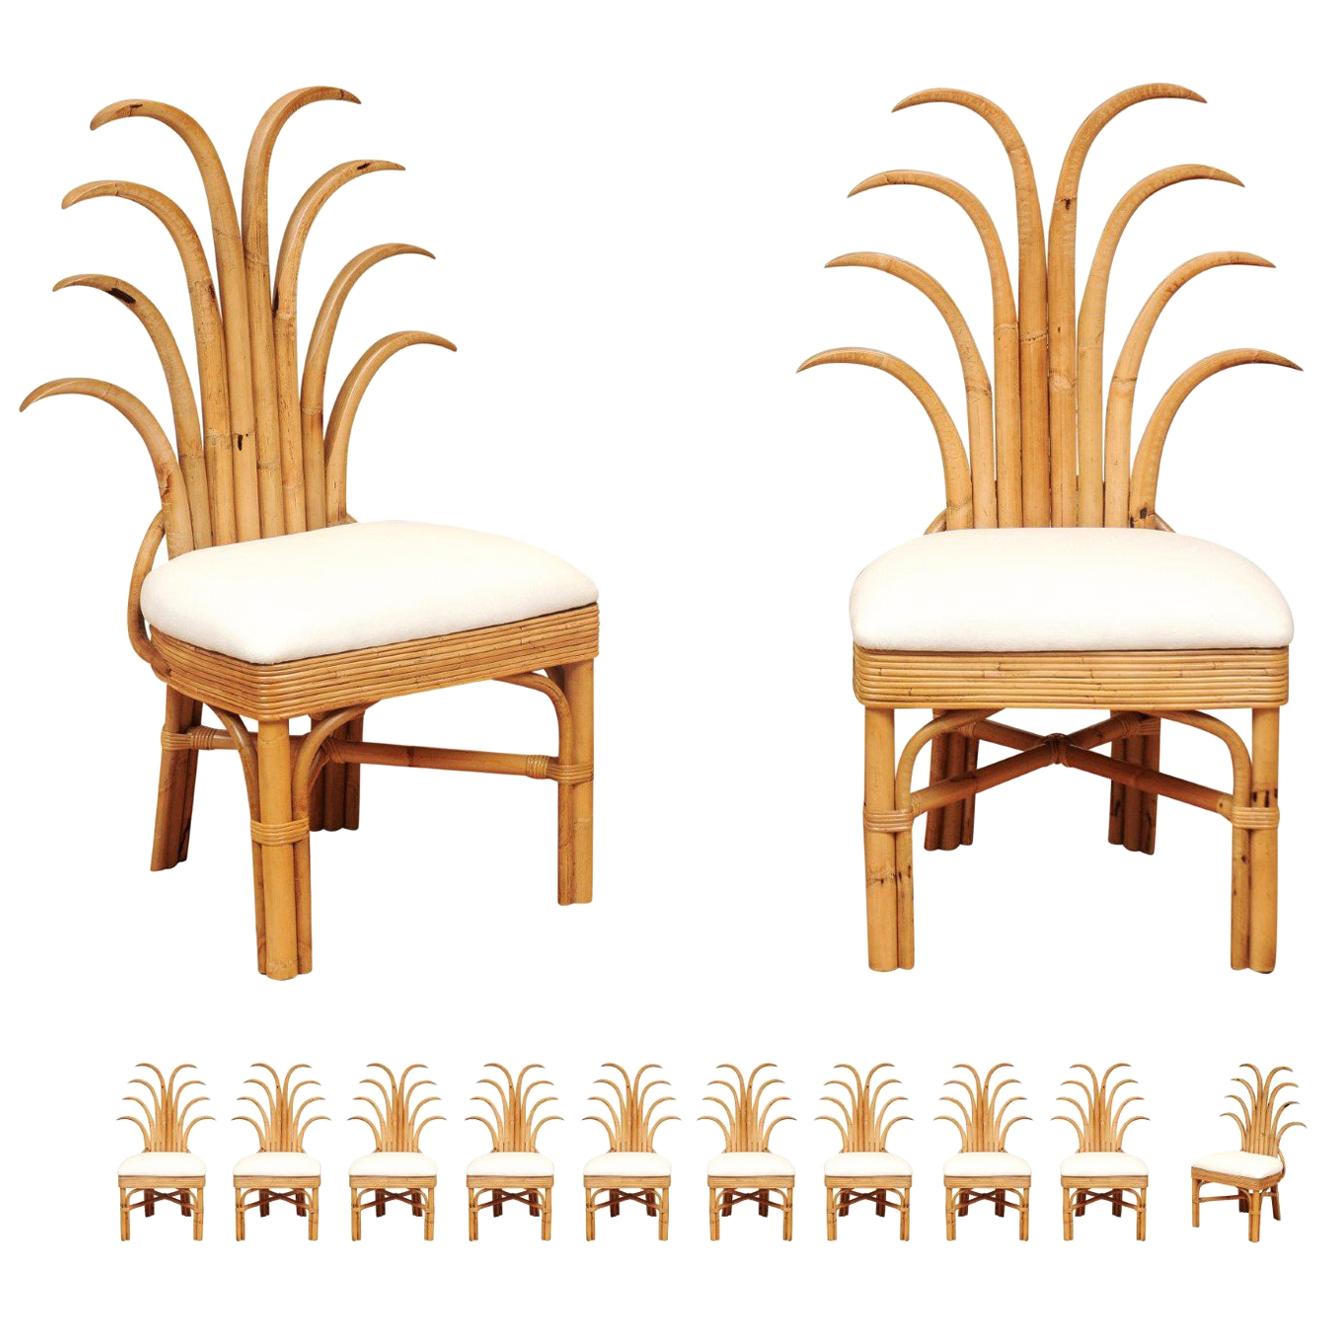 Exquisite Set of 12 Rattan and Cane Palm Frond Dining Chairs, circa 1950